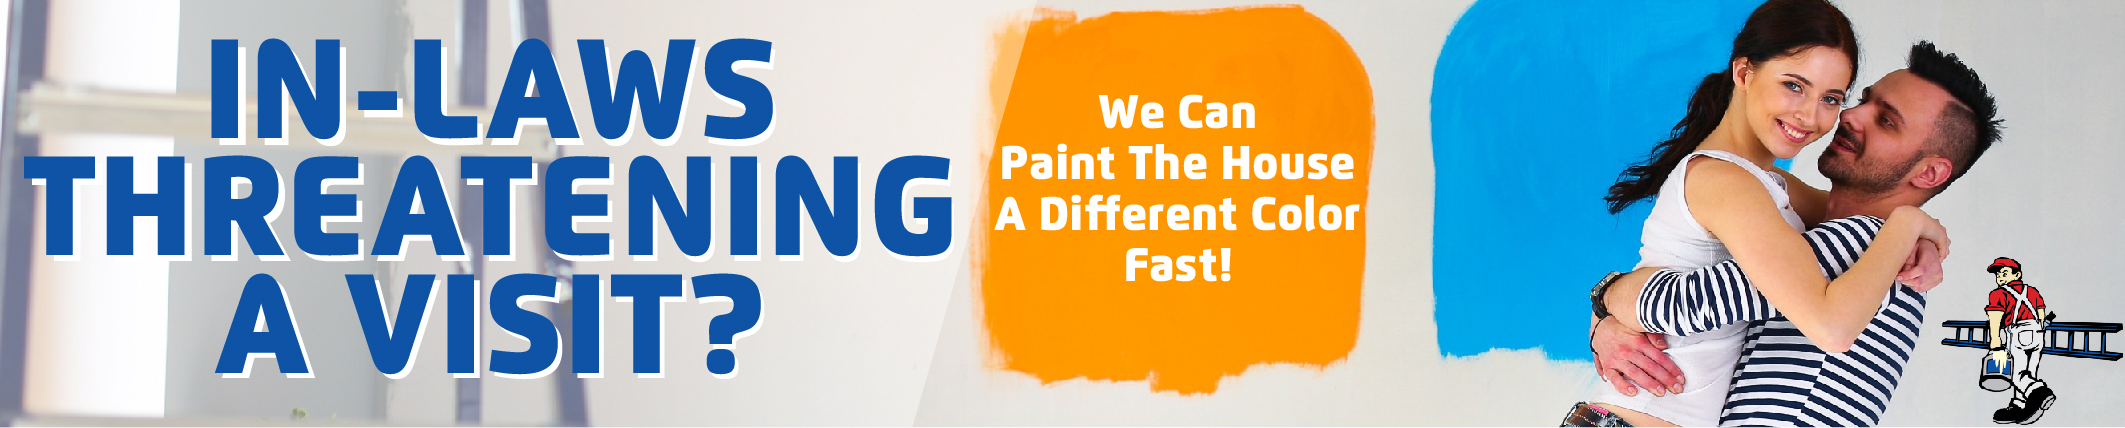 Get Your House Painted Fast in Albuquerque NM